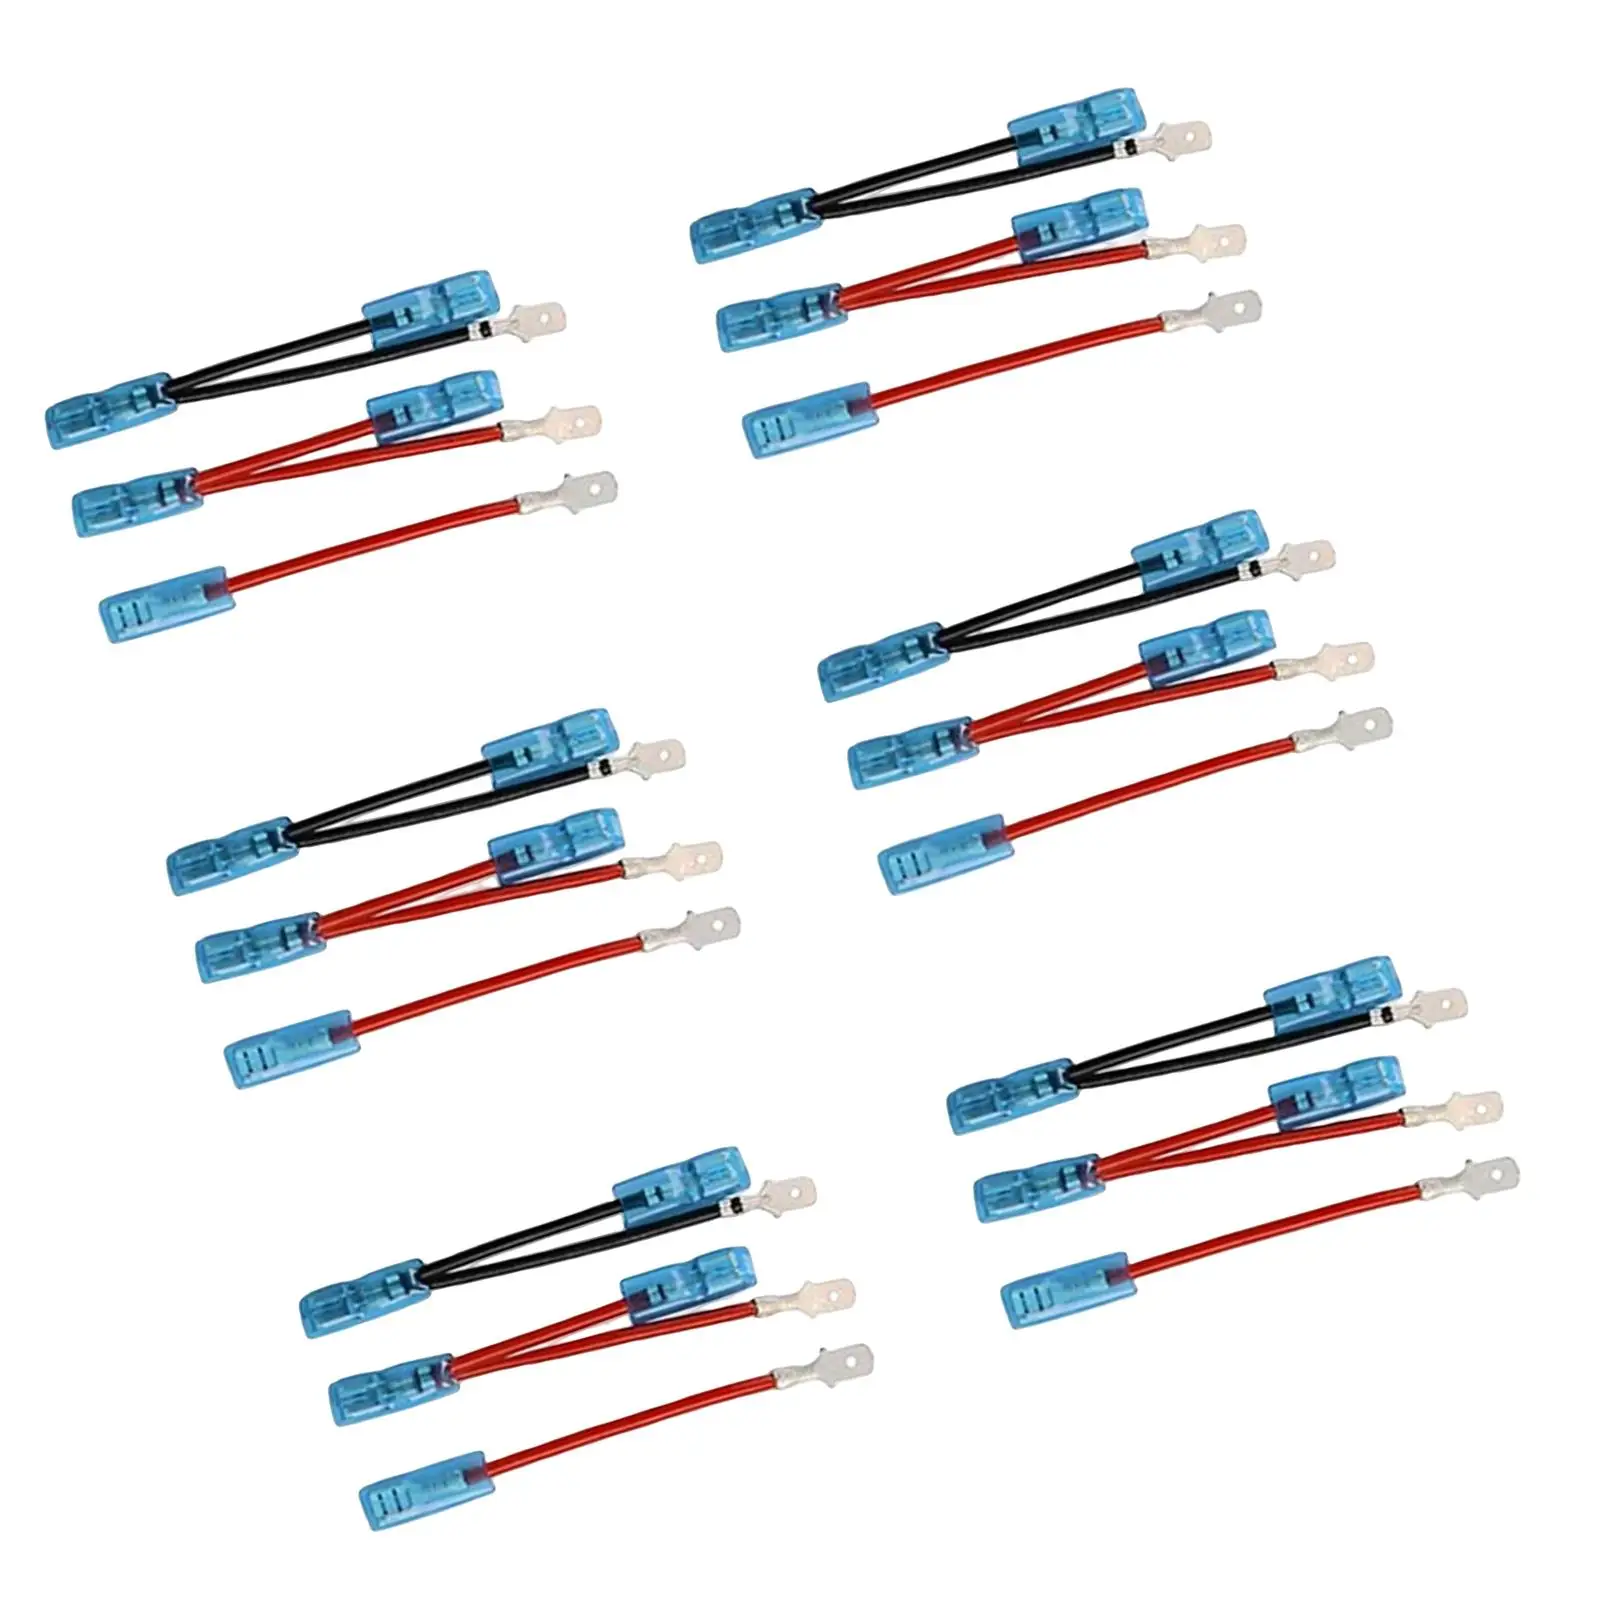 6Pcs 5 Pin Rocker Switch Jumper Wires Set Accessories for Marine Car